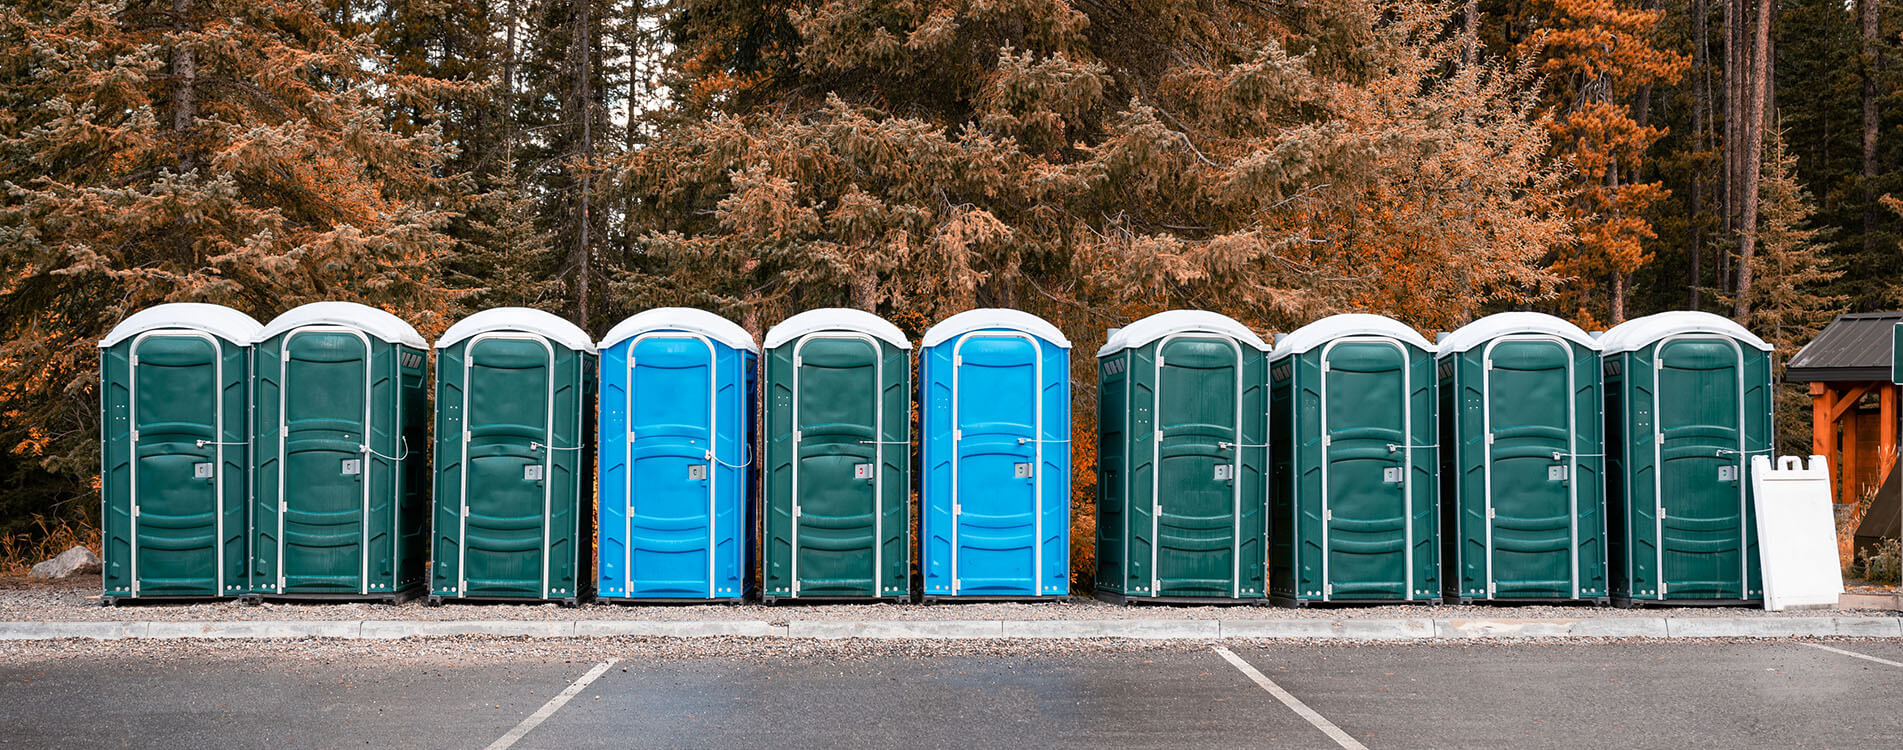 Edgewater, Glen Burnie and Pasadena
    Portable Toilet Rentals, Septic Company and Dumpster Cleaning